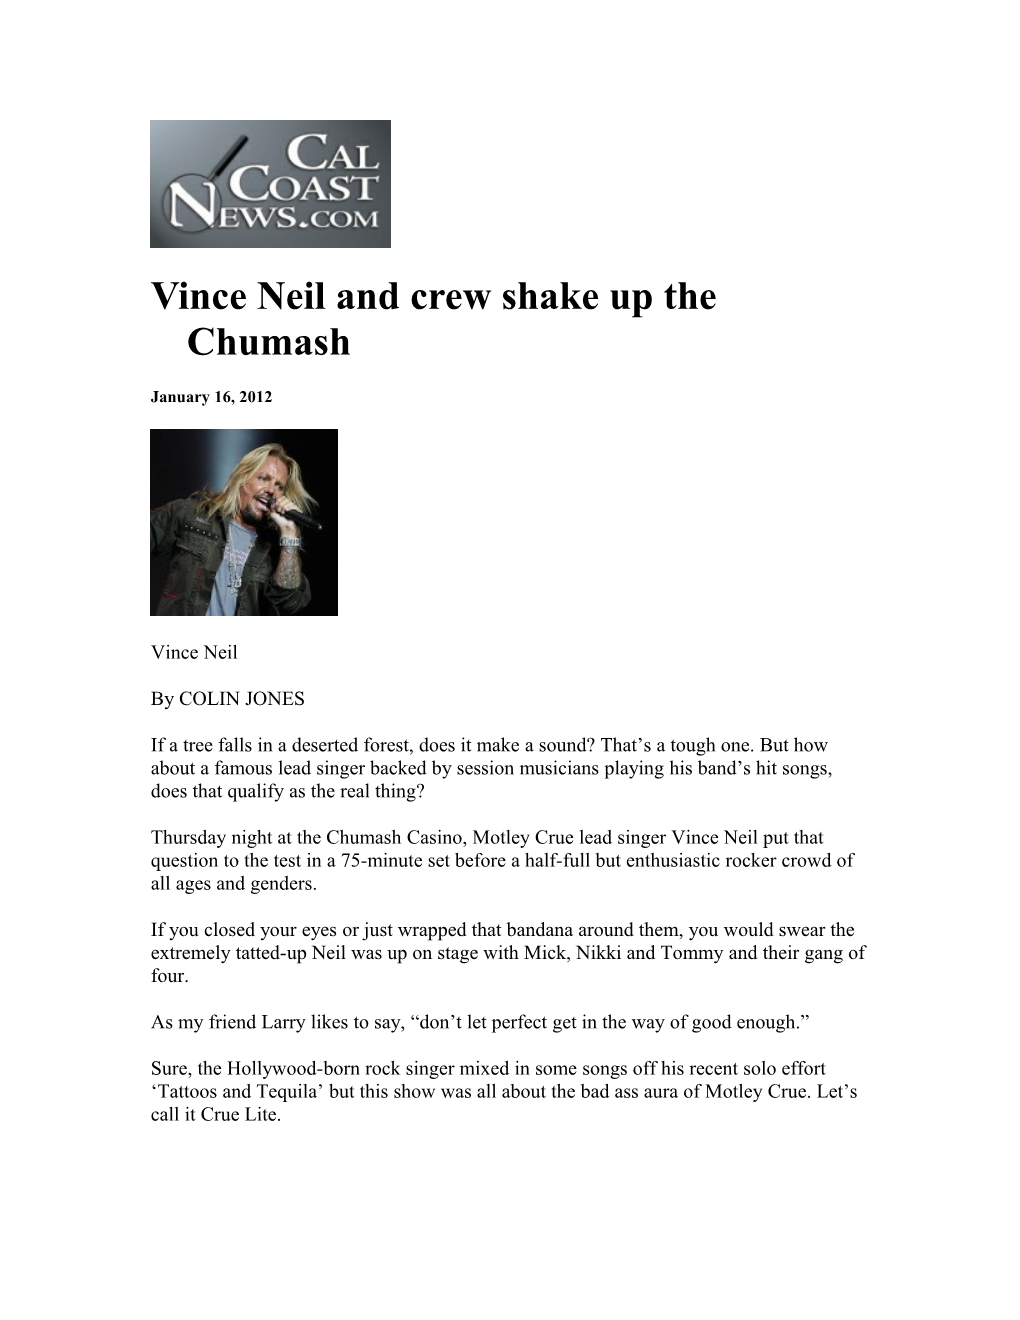 Vince Neil and Crew Shake up the Chumash